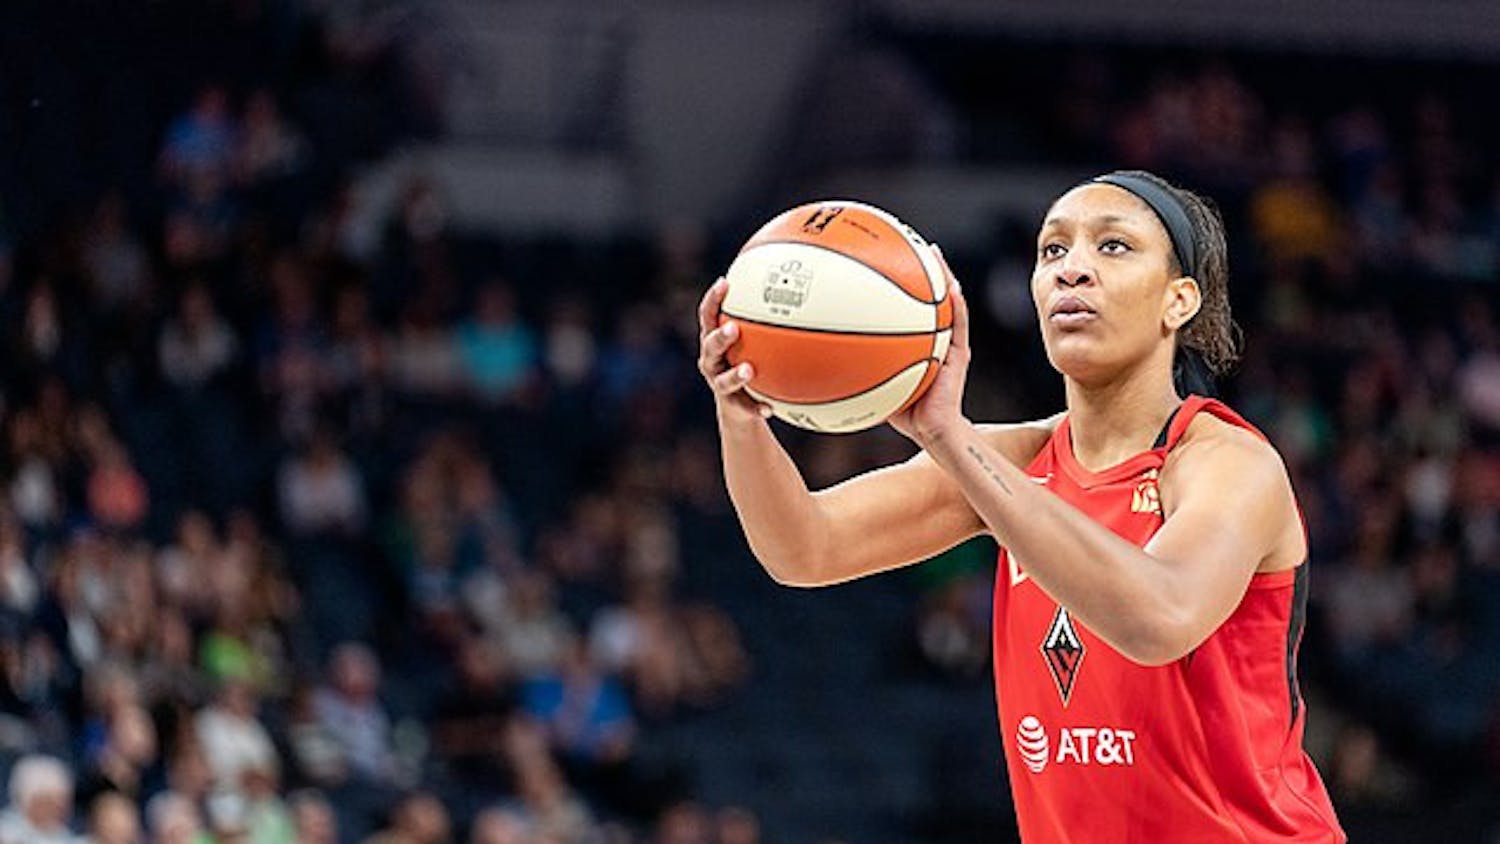 A'ja Wilson shooting a free throw during a game between the Minnesota Lynx and Las Vegas Aces at Target Center in Minneapolis, M.N. on June 1, 2019. The Aces won the game 80-75.